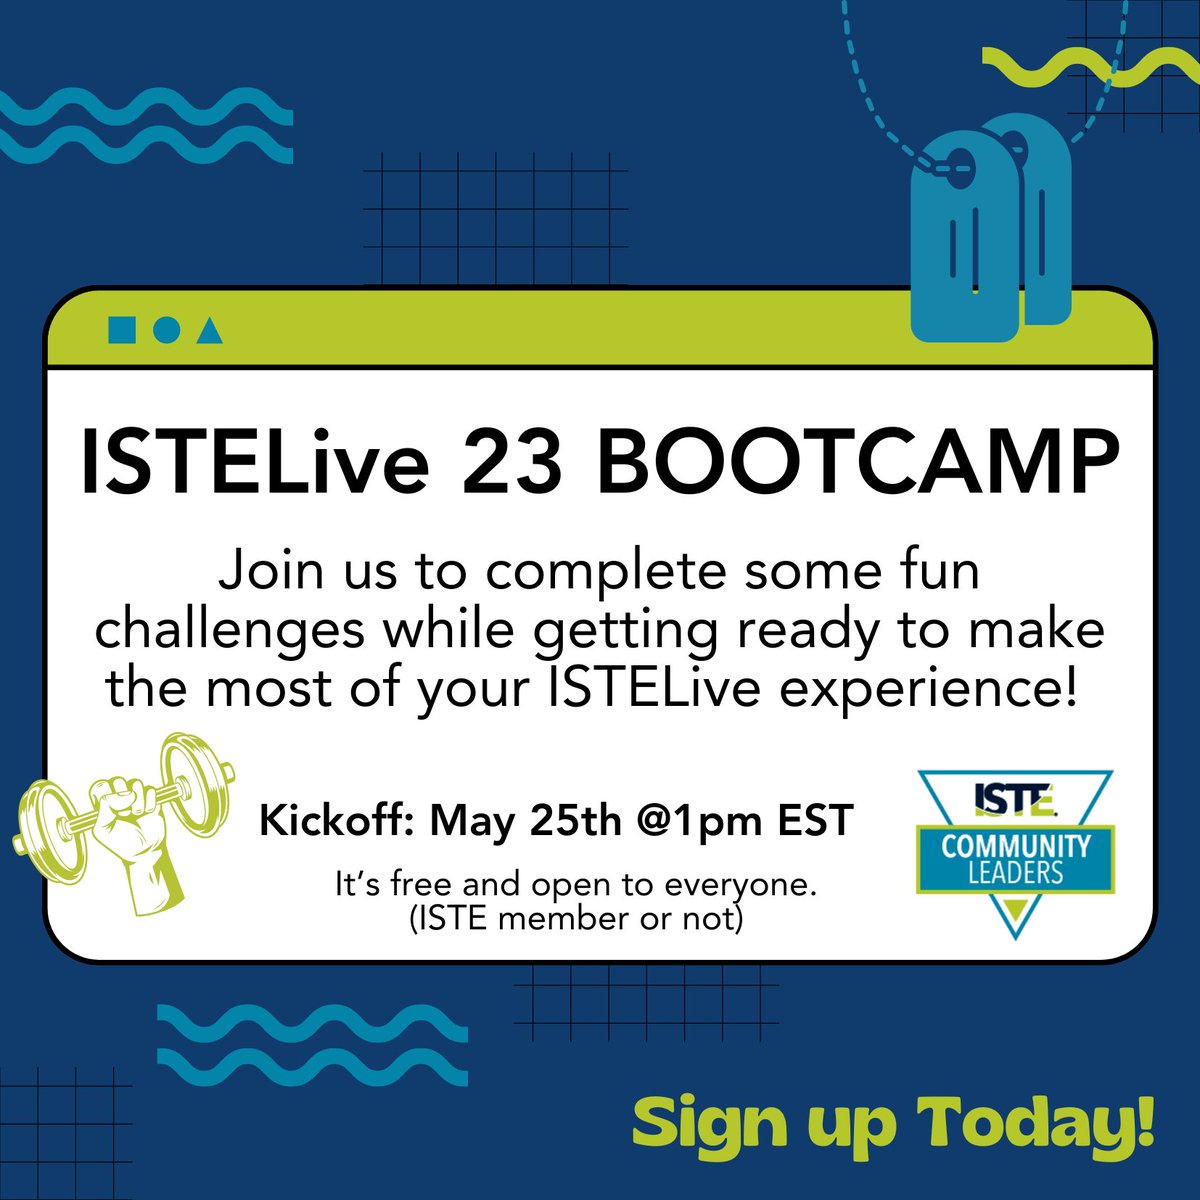 Join the ISTELive 23 Bootcamp for free! Asynchronous physical, mental, and social challenges to help educators prepare for the conference.#ISTELive #ISTEChat @ISTEOfficial @ISTECommunity  @gret 
Sign up today! 🔗bit.ly/ISTEBootcamp